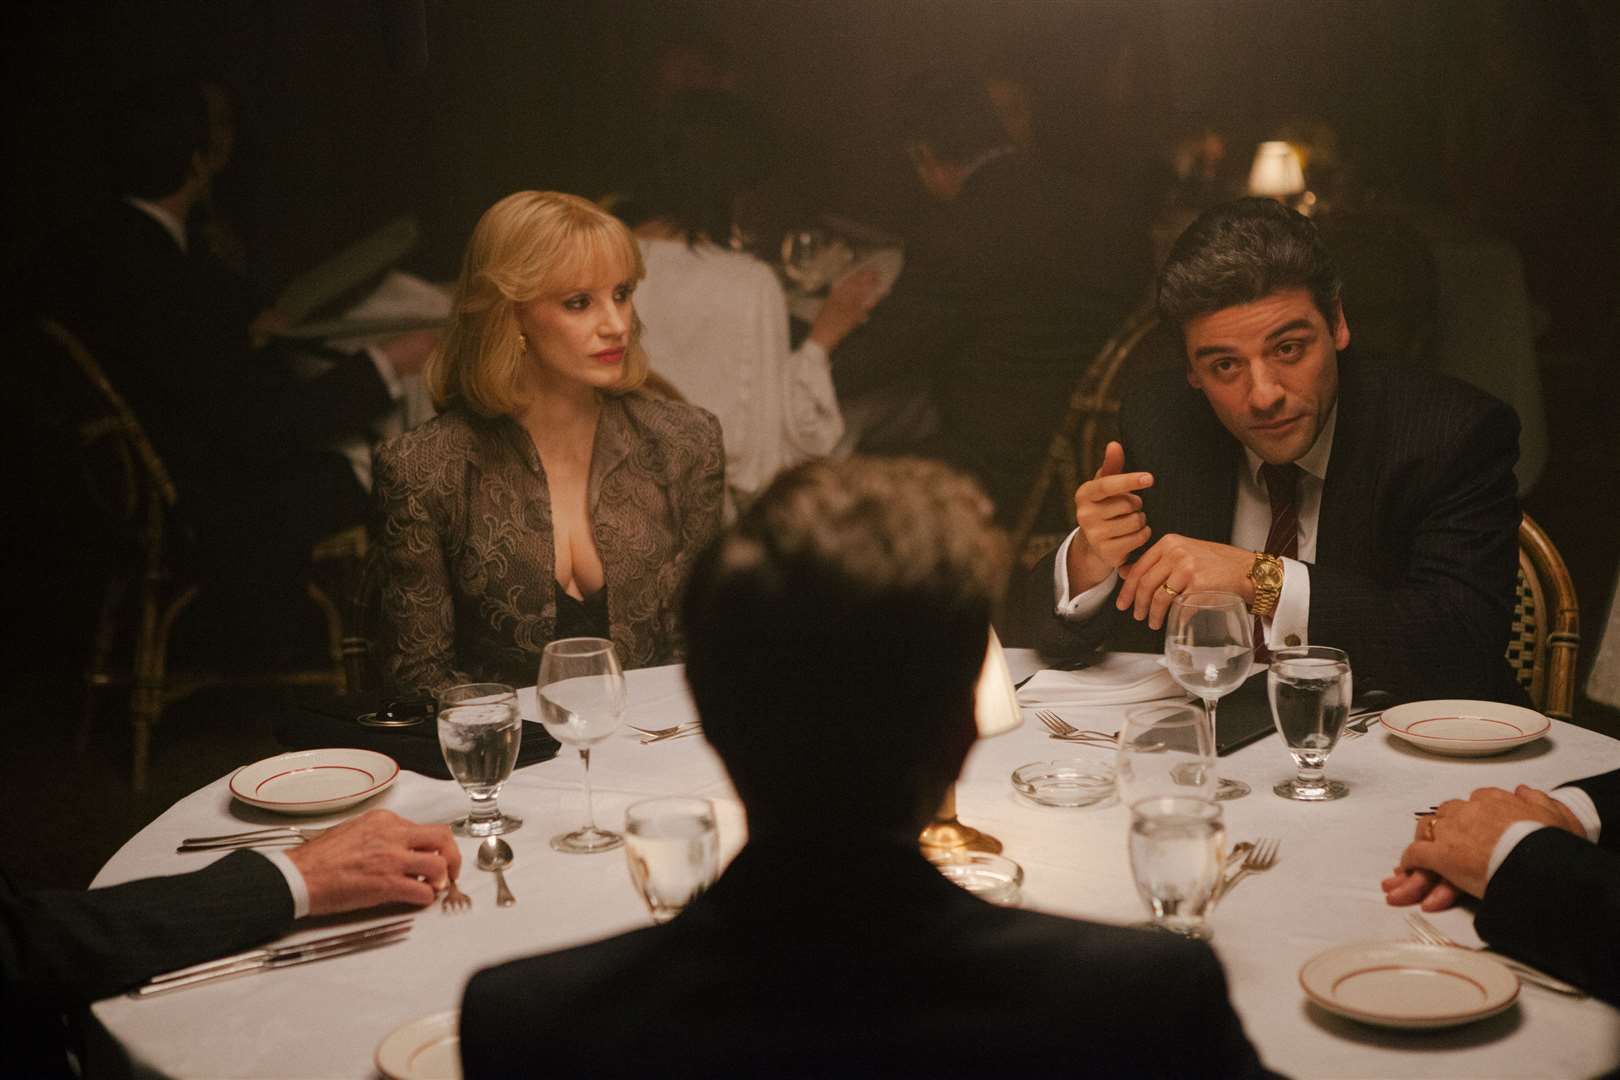 Oscar Isaac as Abel and Jessica Chastain as Anna Morales, in a Most Violent Year. Picture: PA Photo/Atsushi Nishijima/Icon Film Distribution